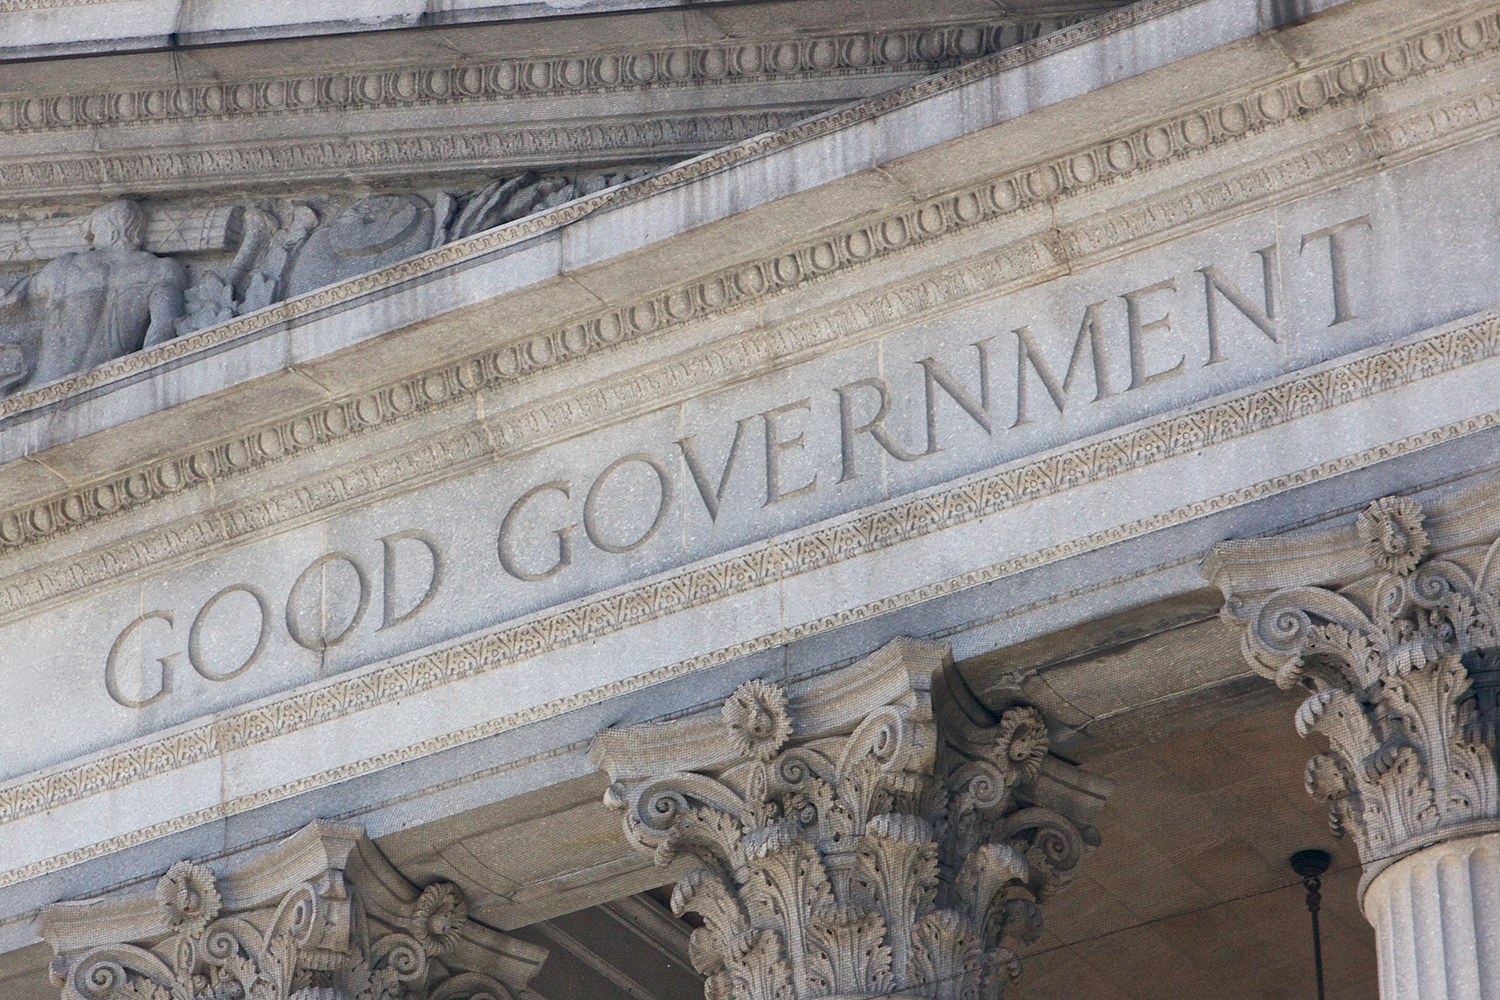 The words "Good Government" on a neoclassical facade. ID 51459059 © Jannis Werner | Dreamstime images.